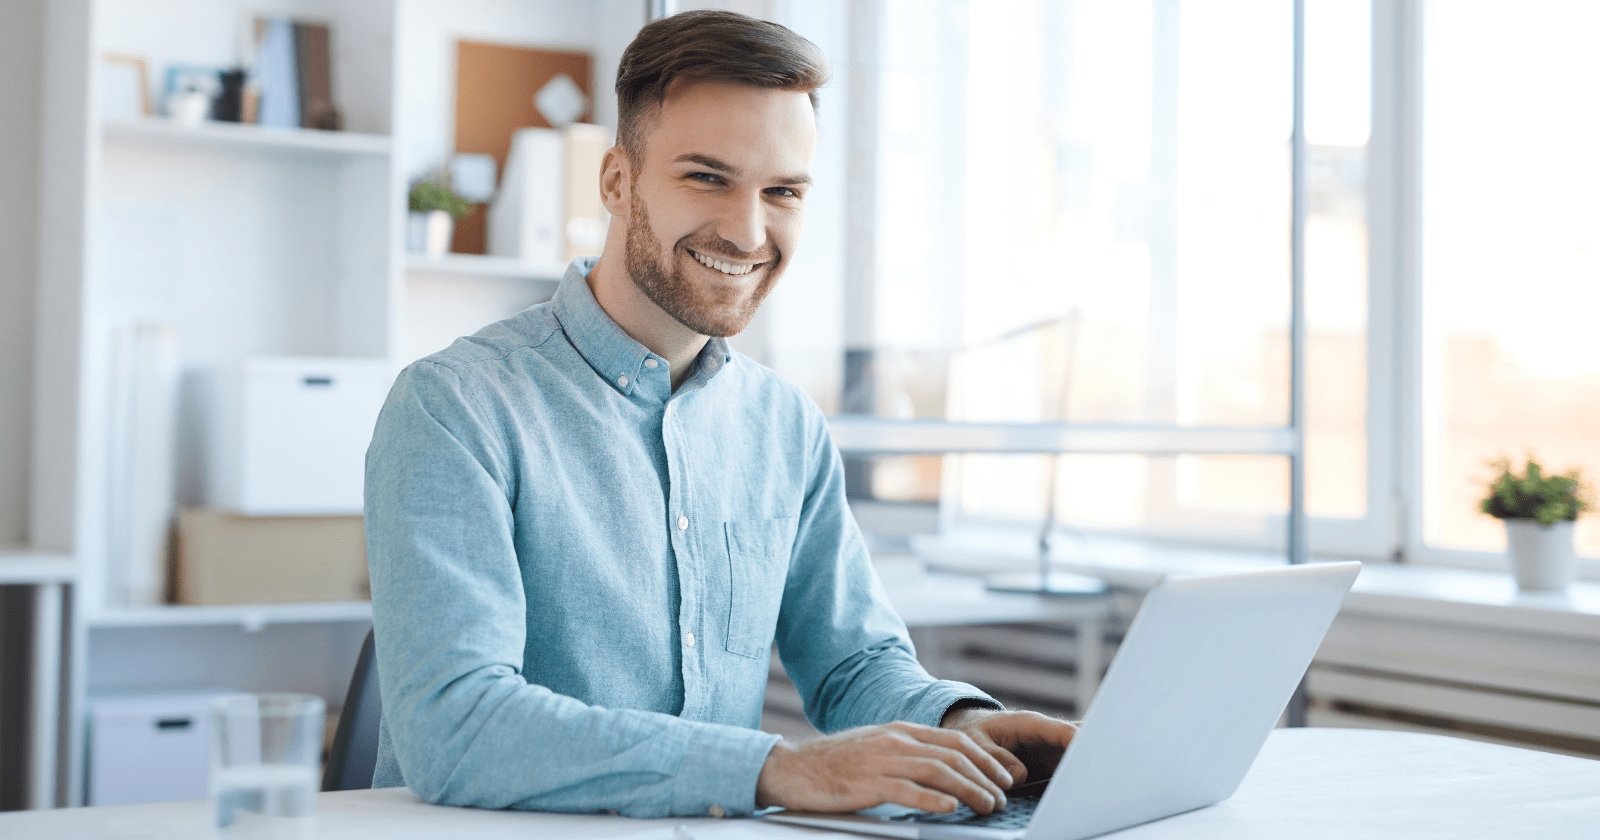 The photo shows a smiling man sitting in front of a laptop.